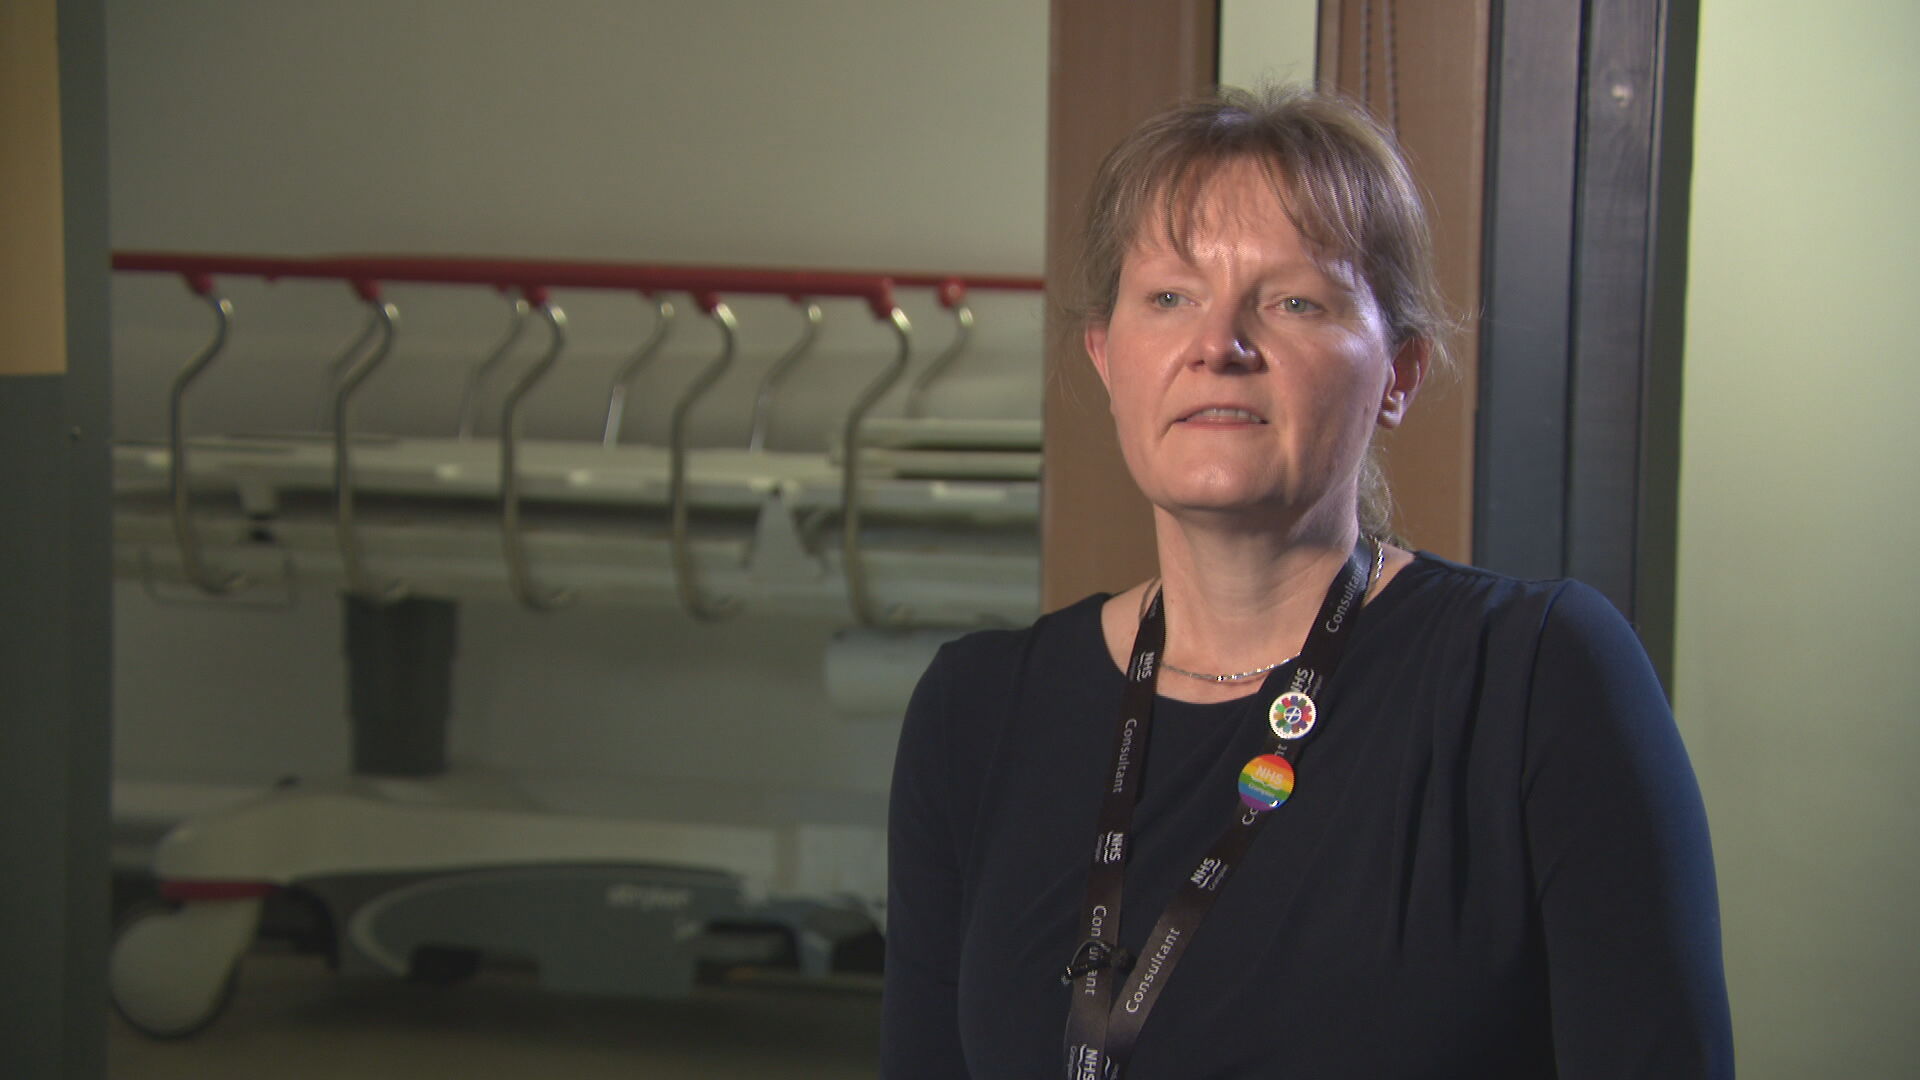 A&E consultant Catharina Hartman has told of the affect on staff.